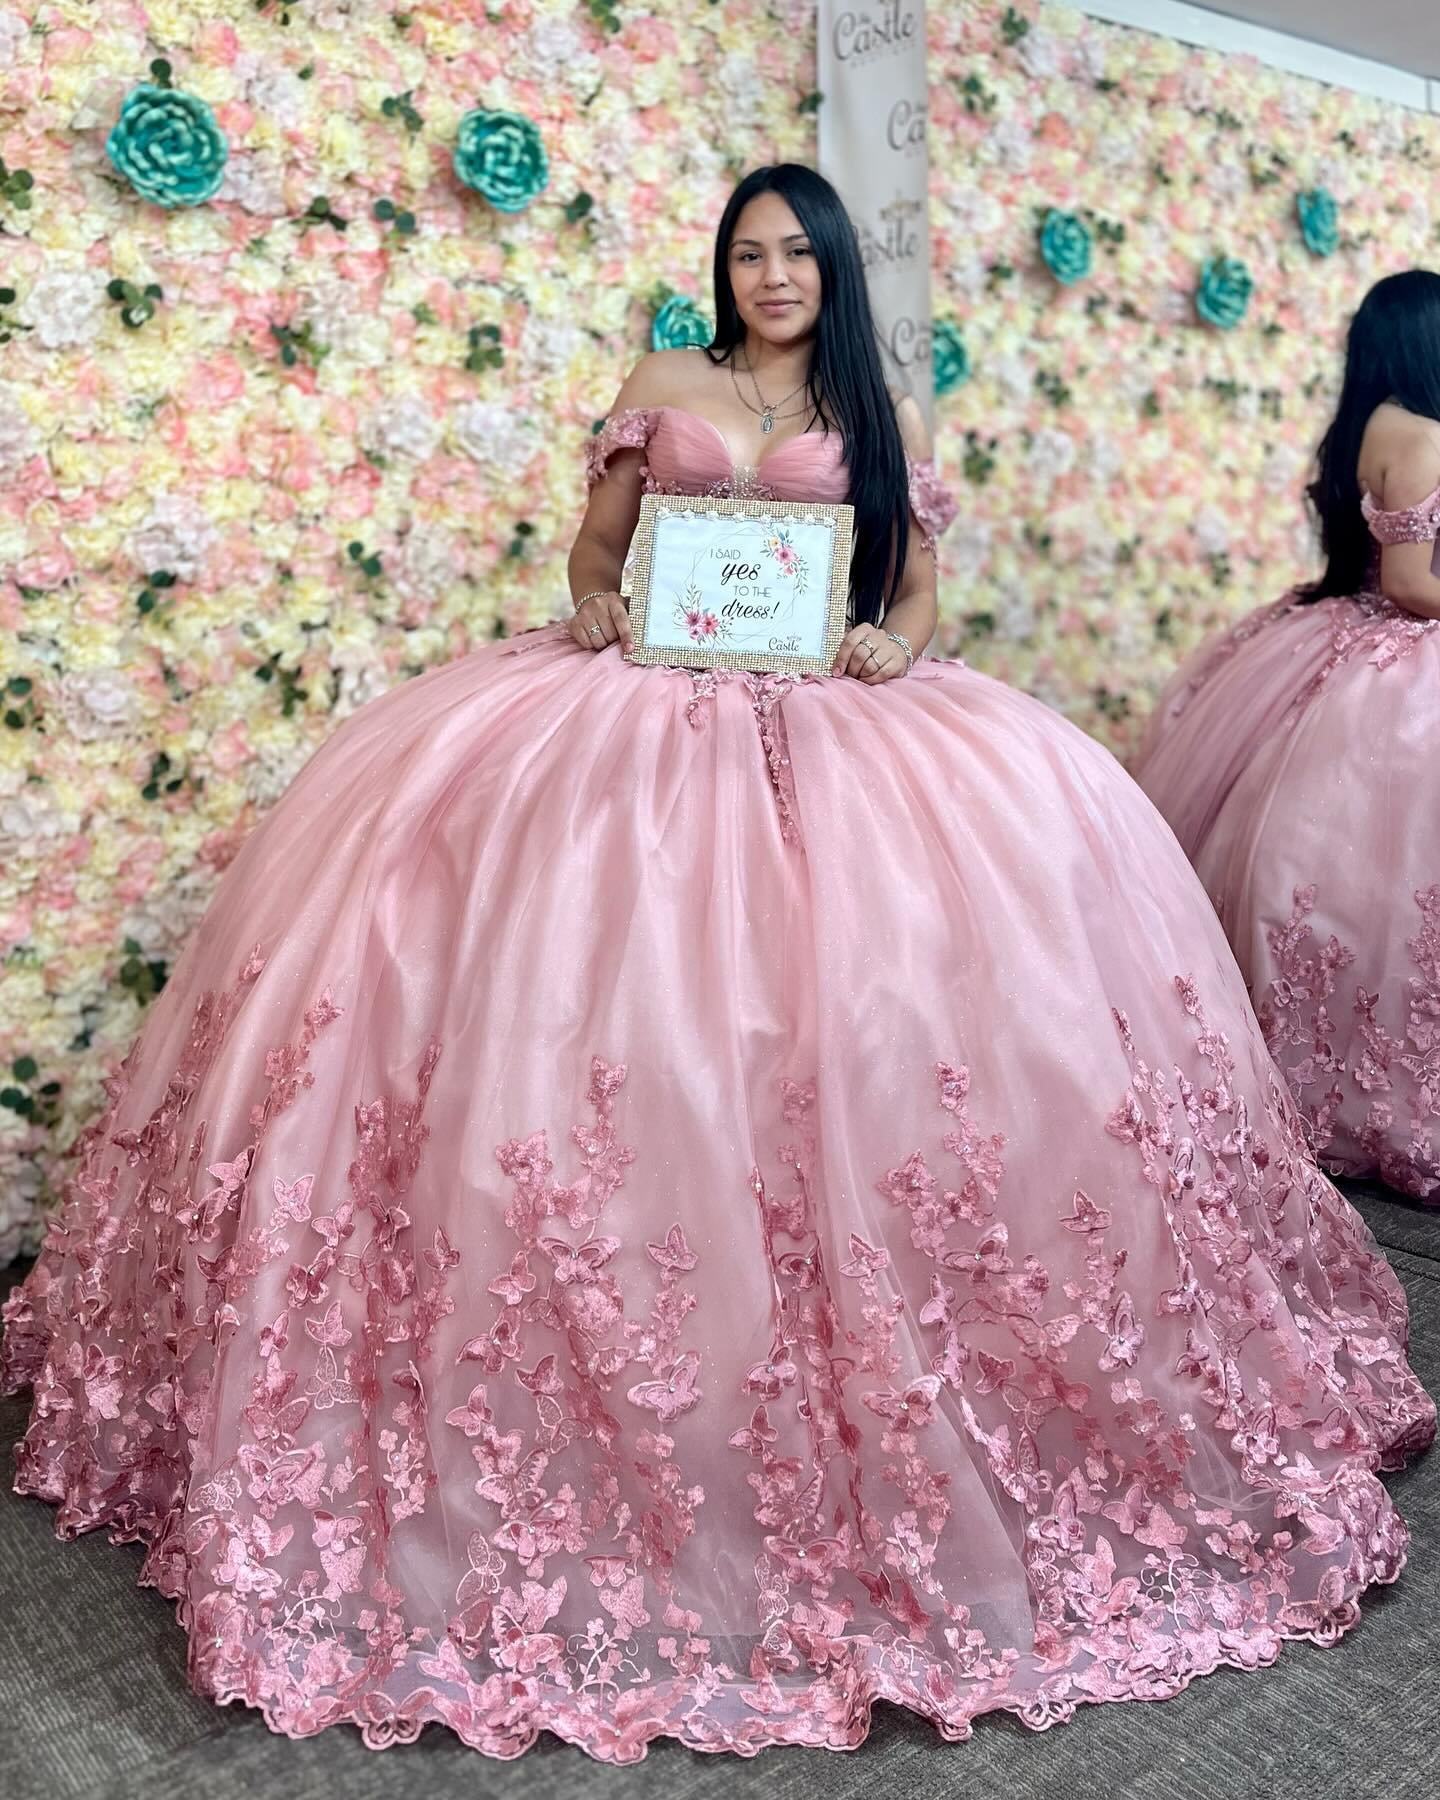 She said yes to the beautiful butterfly dress! 😍🦋🩷
✨
✨ ✨
✨✨
✨✨✨
✨✨✨✨
✨✨✨✨✨
✨✨✨✨
✨✨✨
✨✨
✨
#mycastleboutique #pearland #pearlandtx #quincea&ntilde;era #quinceanera #quince #ballgown #sweet15 #dresses #partydress #vestidosdequince #xv #prom #dress #q